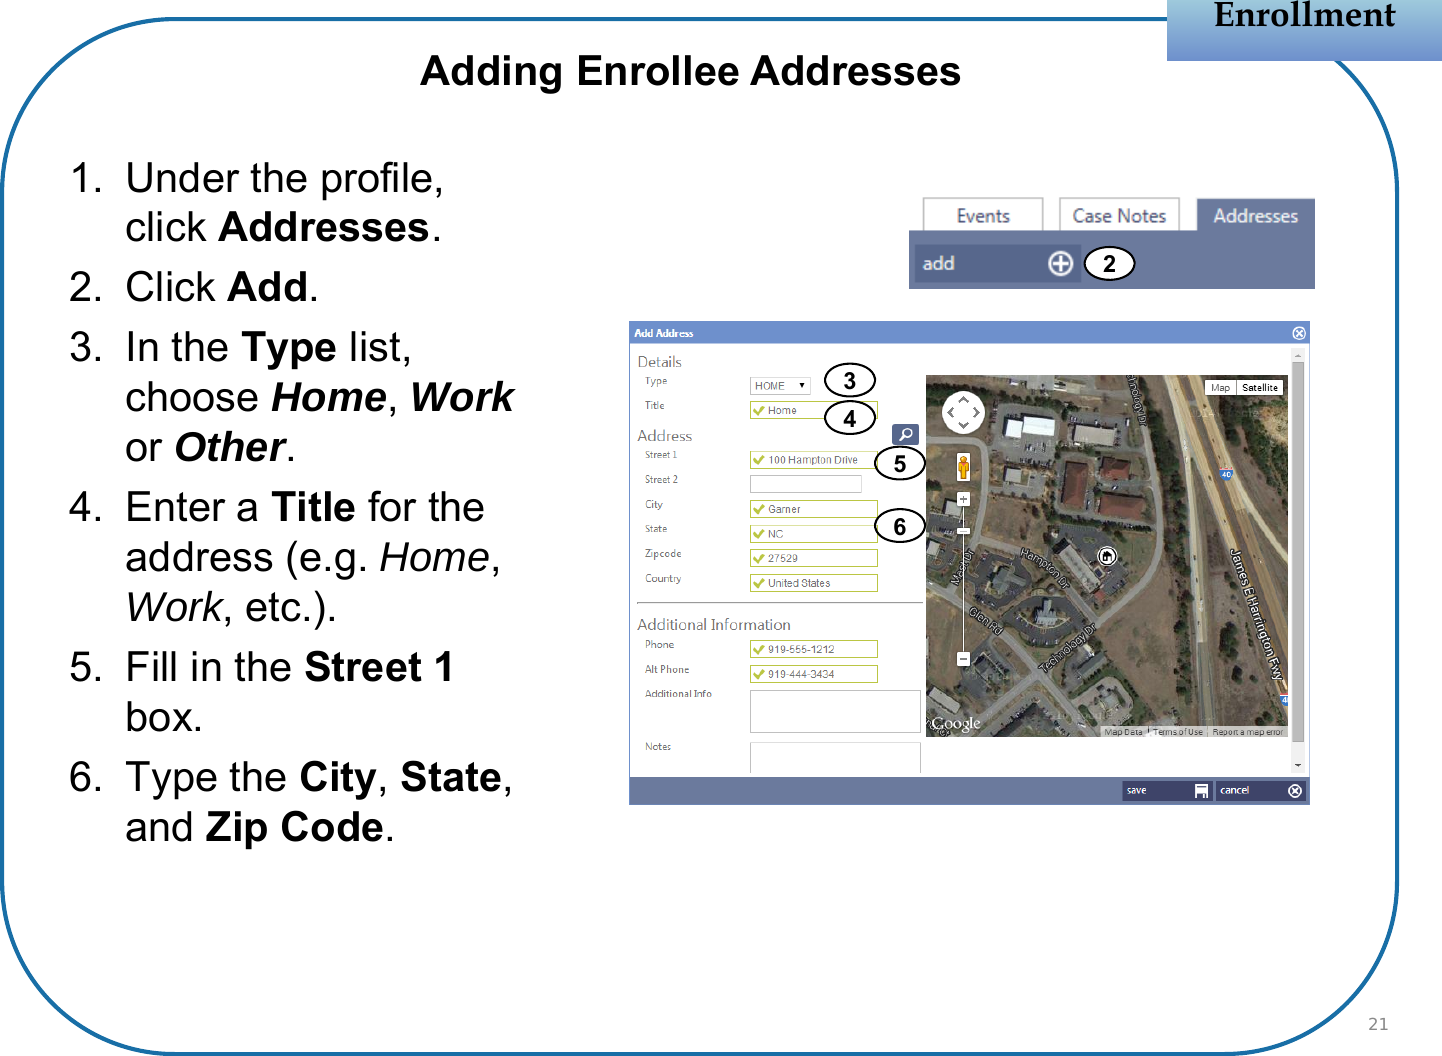 1. Under the profile, click Addresses.2. Click Add.3. In the Type list, choose Home, Workor Other.4. Enter a Title for the address (e.g. Home, Work, etc.). 5. Fill in the Street 1 box.6. Type the City, State, and Zip Code.EnrollmentEnrollment212Adding Enrollee Addresses4563